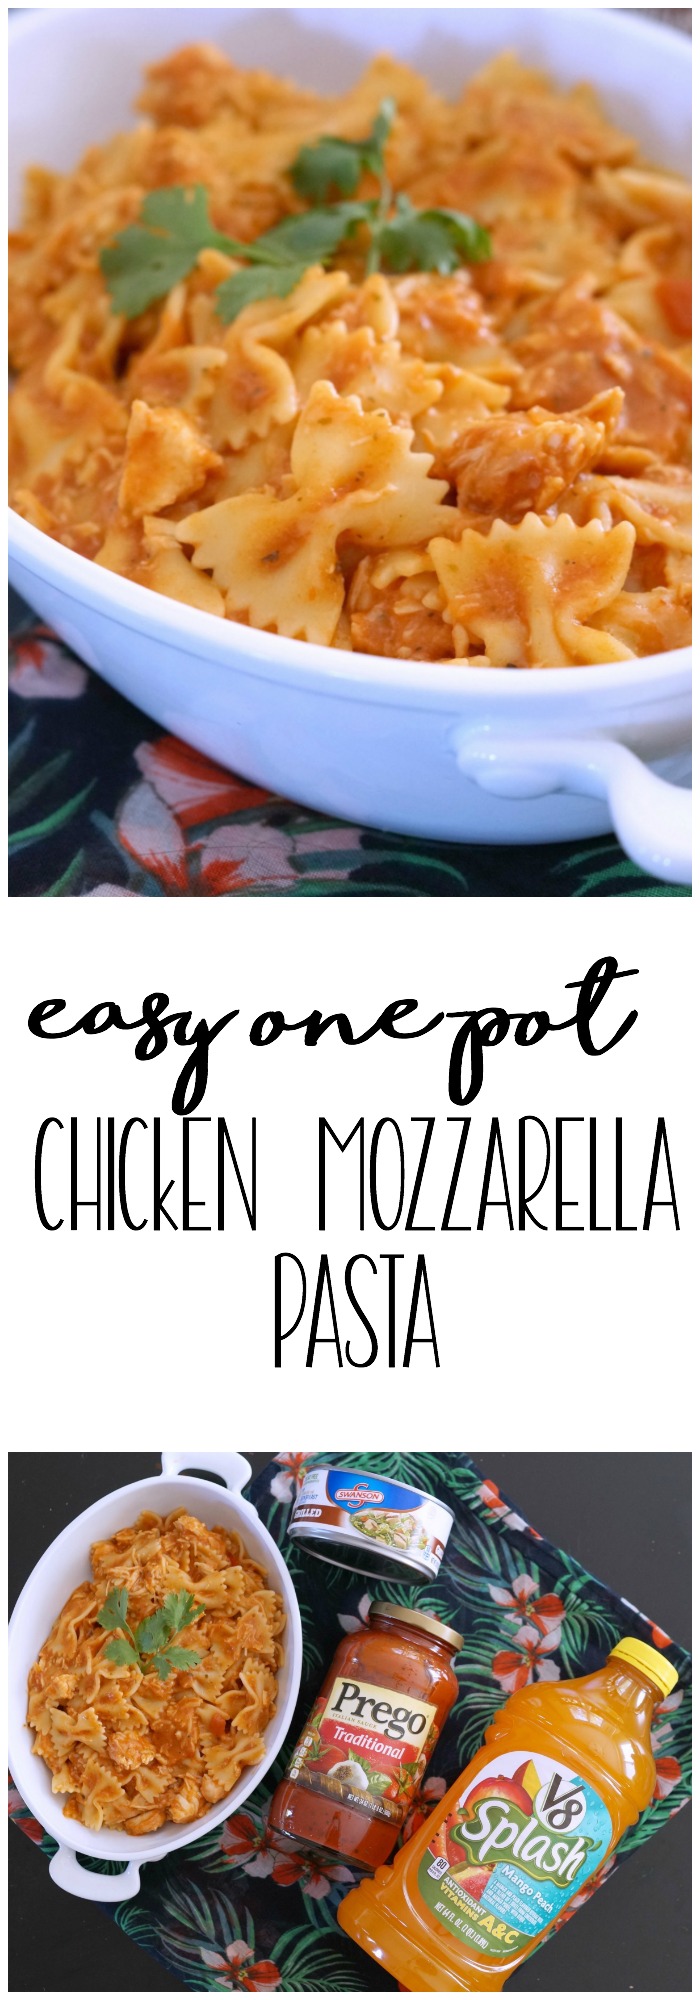 This quick and easy Chicken Mozzarella Pasta recipe is perfect for busy school nights. You can make Chicken Mozzarella Pasta in less than 30 minutes!